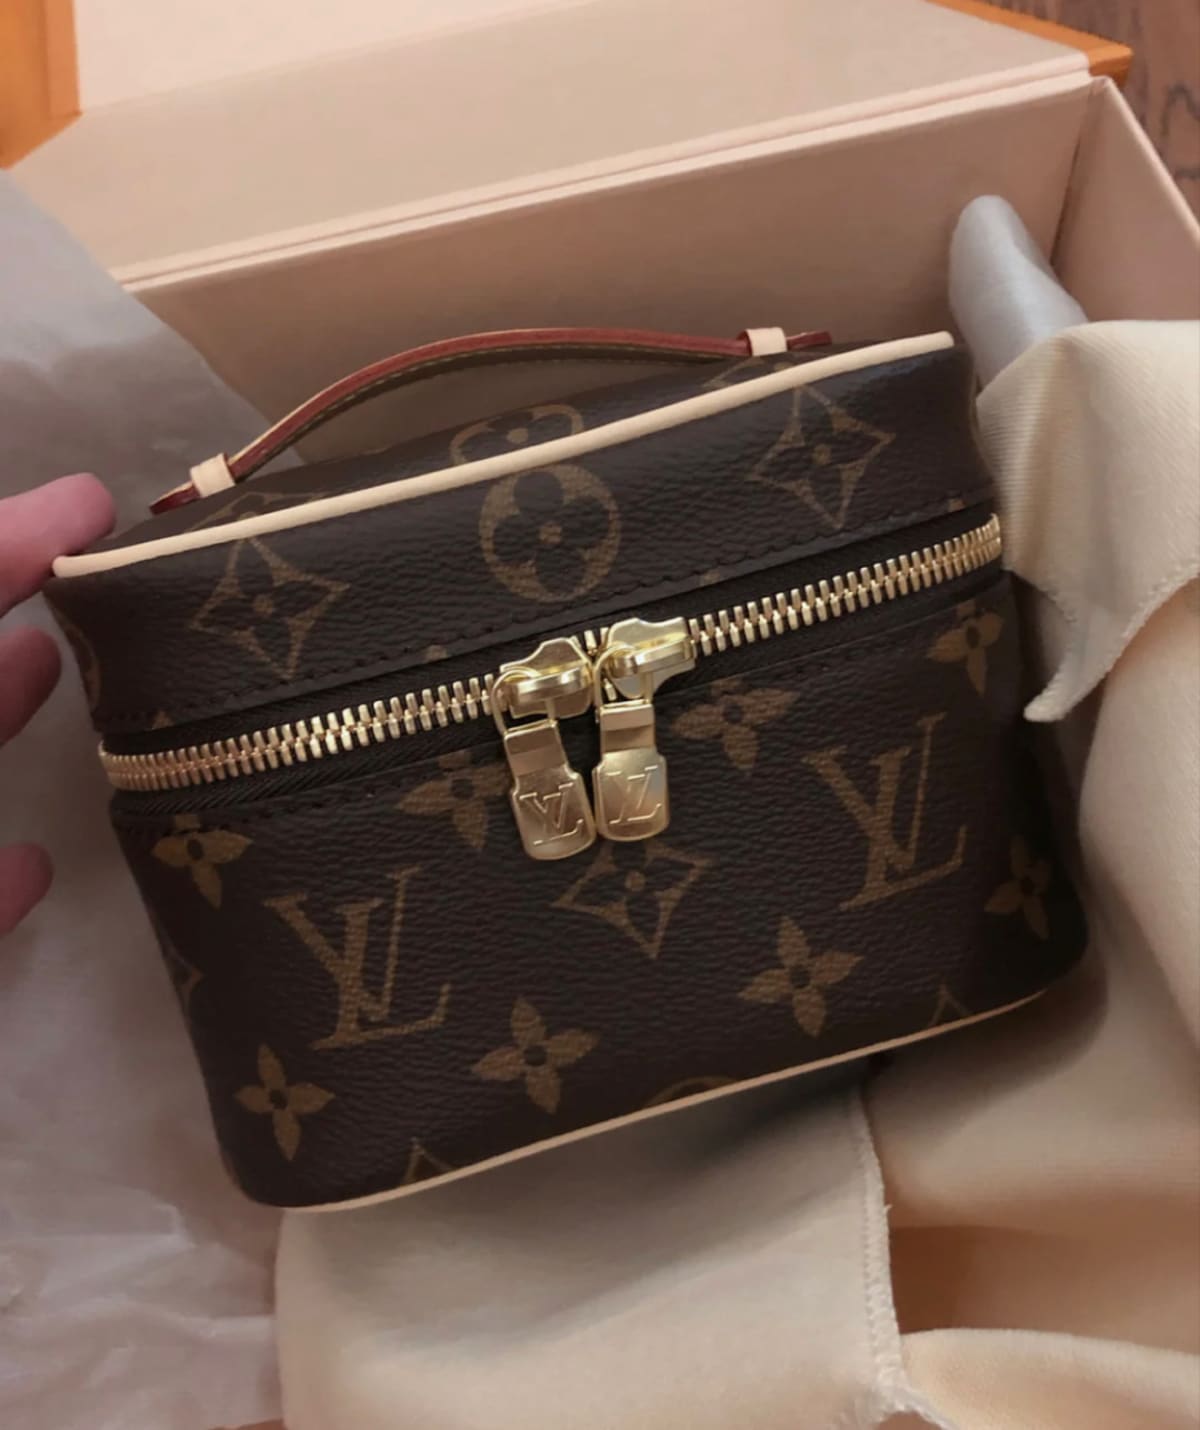 Bought this LV Nice Nano at Malaysia lv site. Been looking for this since  forever but it's always OO